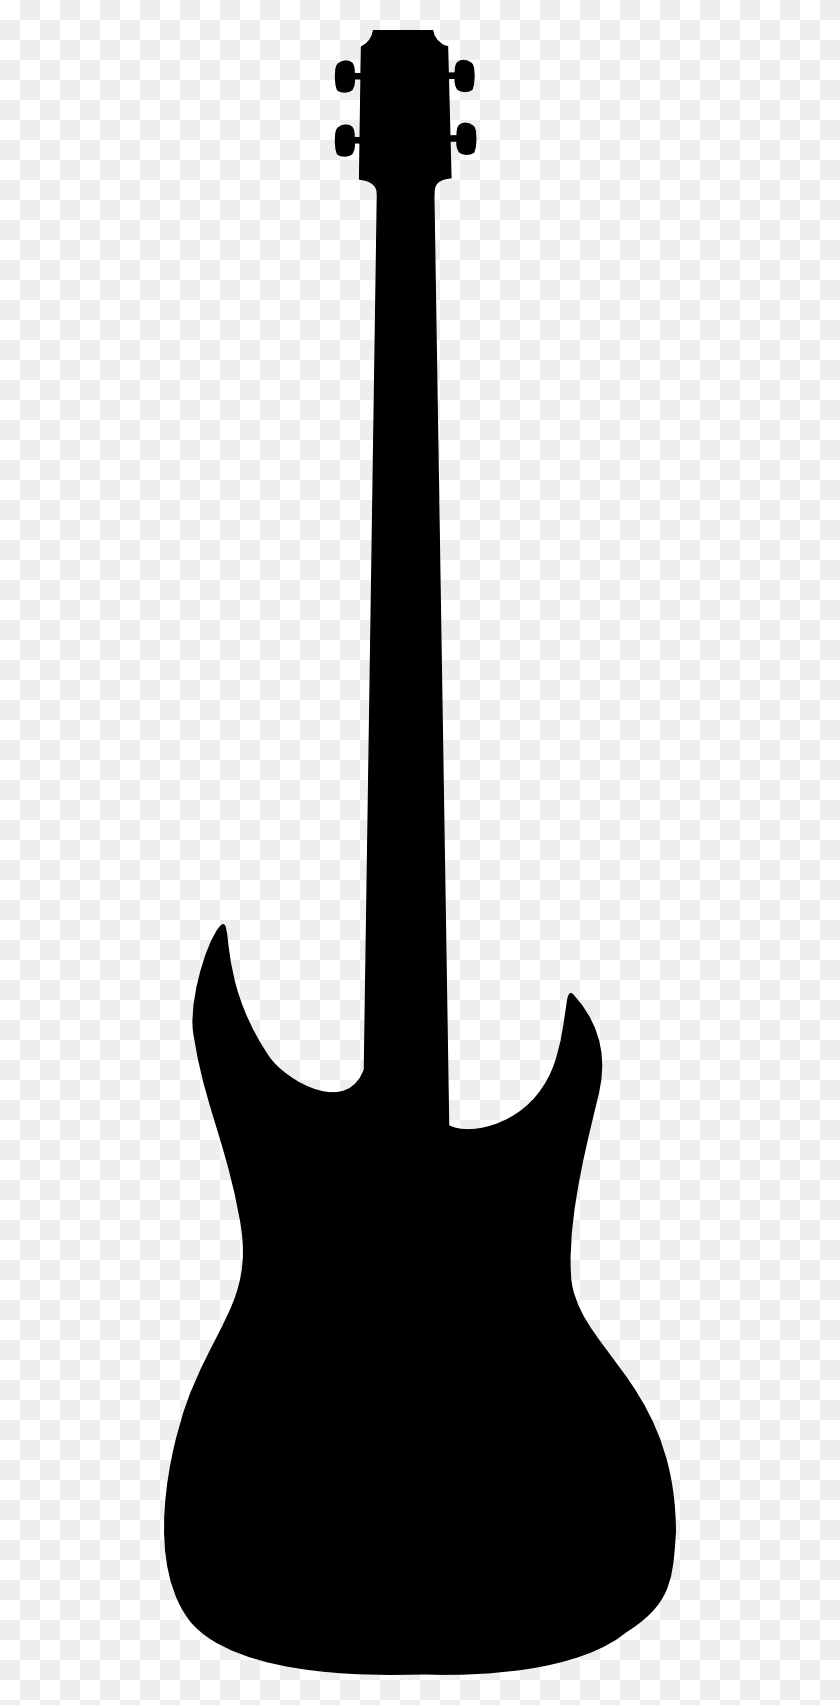 512x1645 Black And White Guitar Clip Art - Clarinet Clipart Black And White